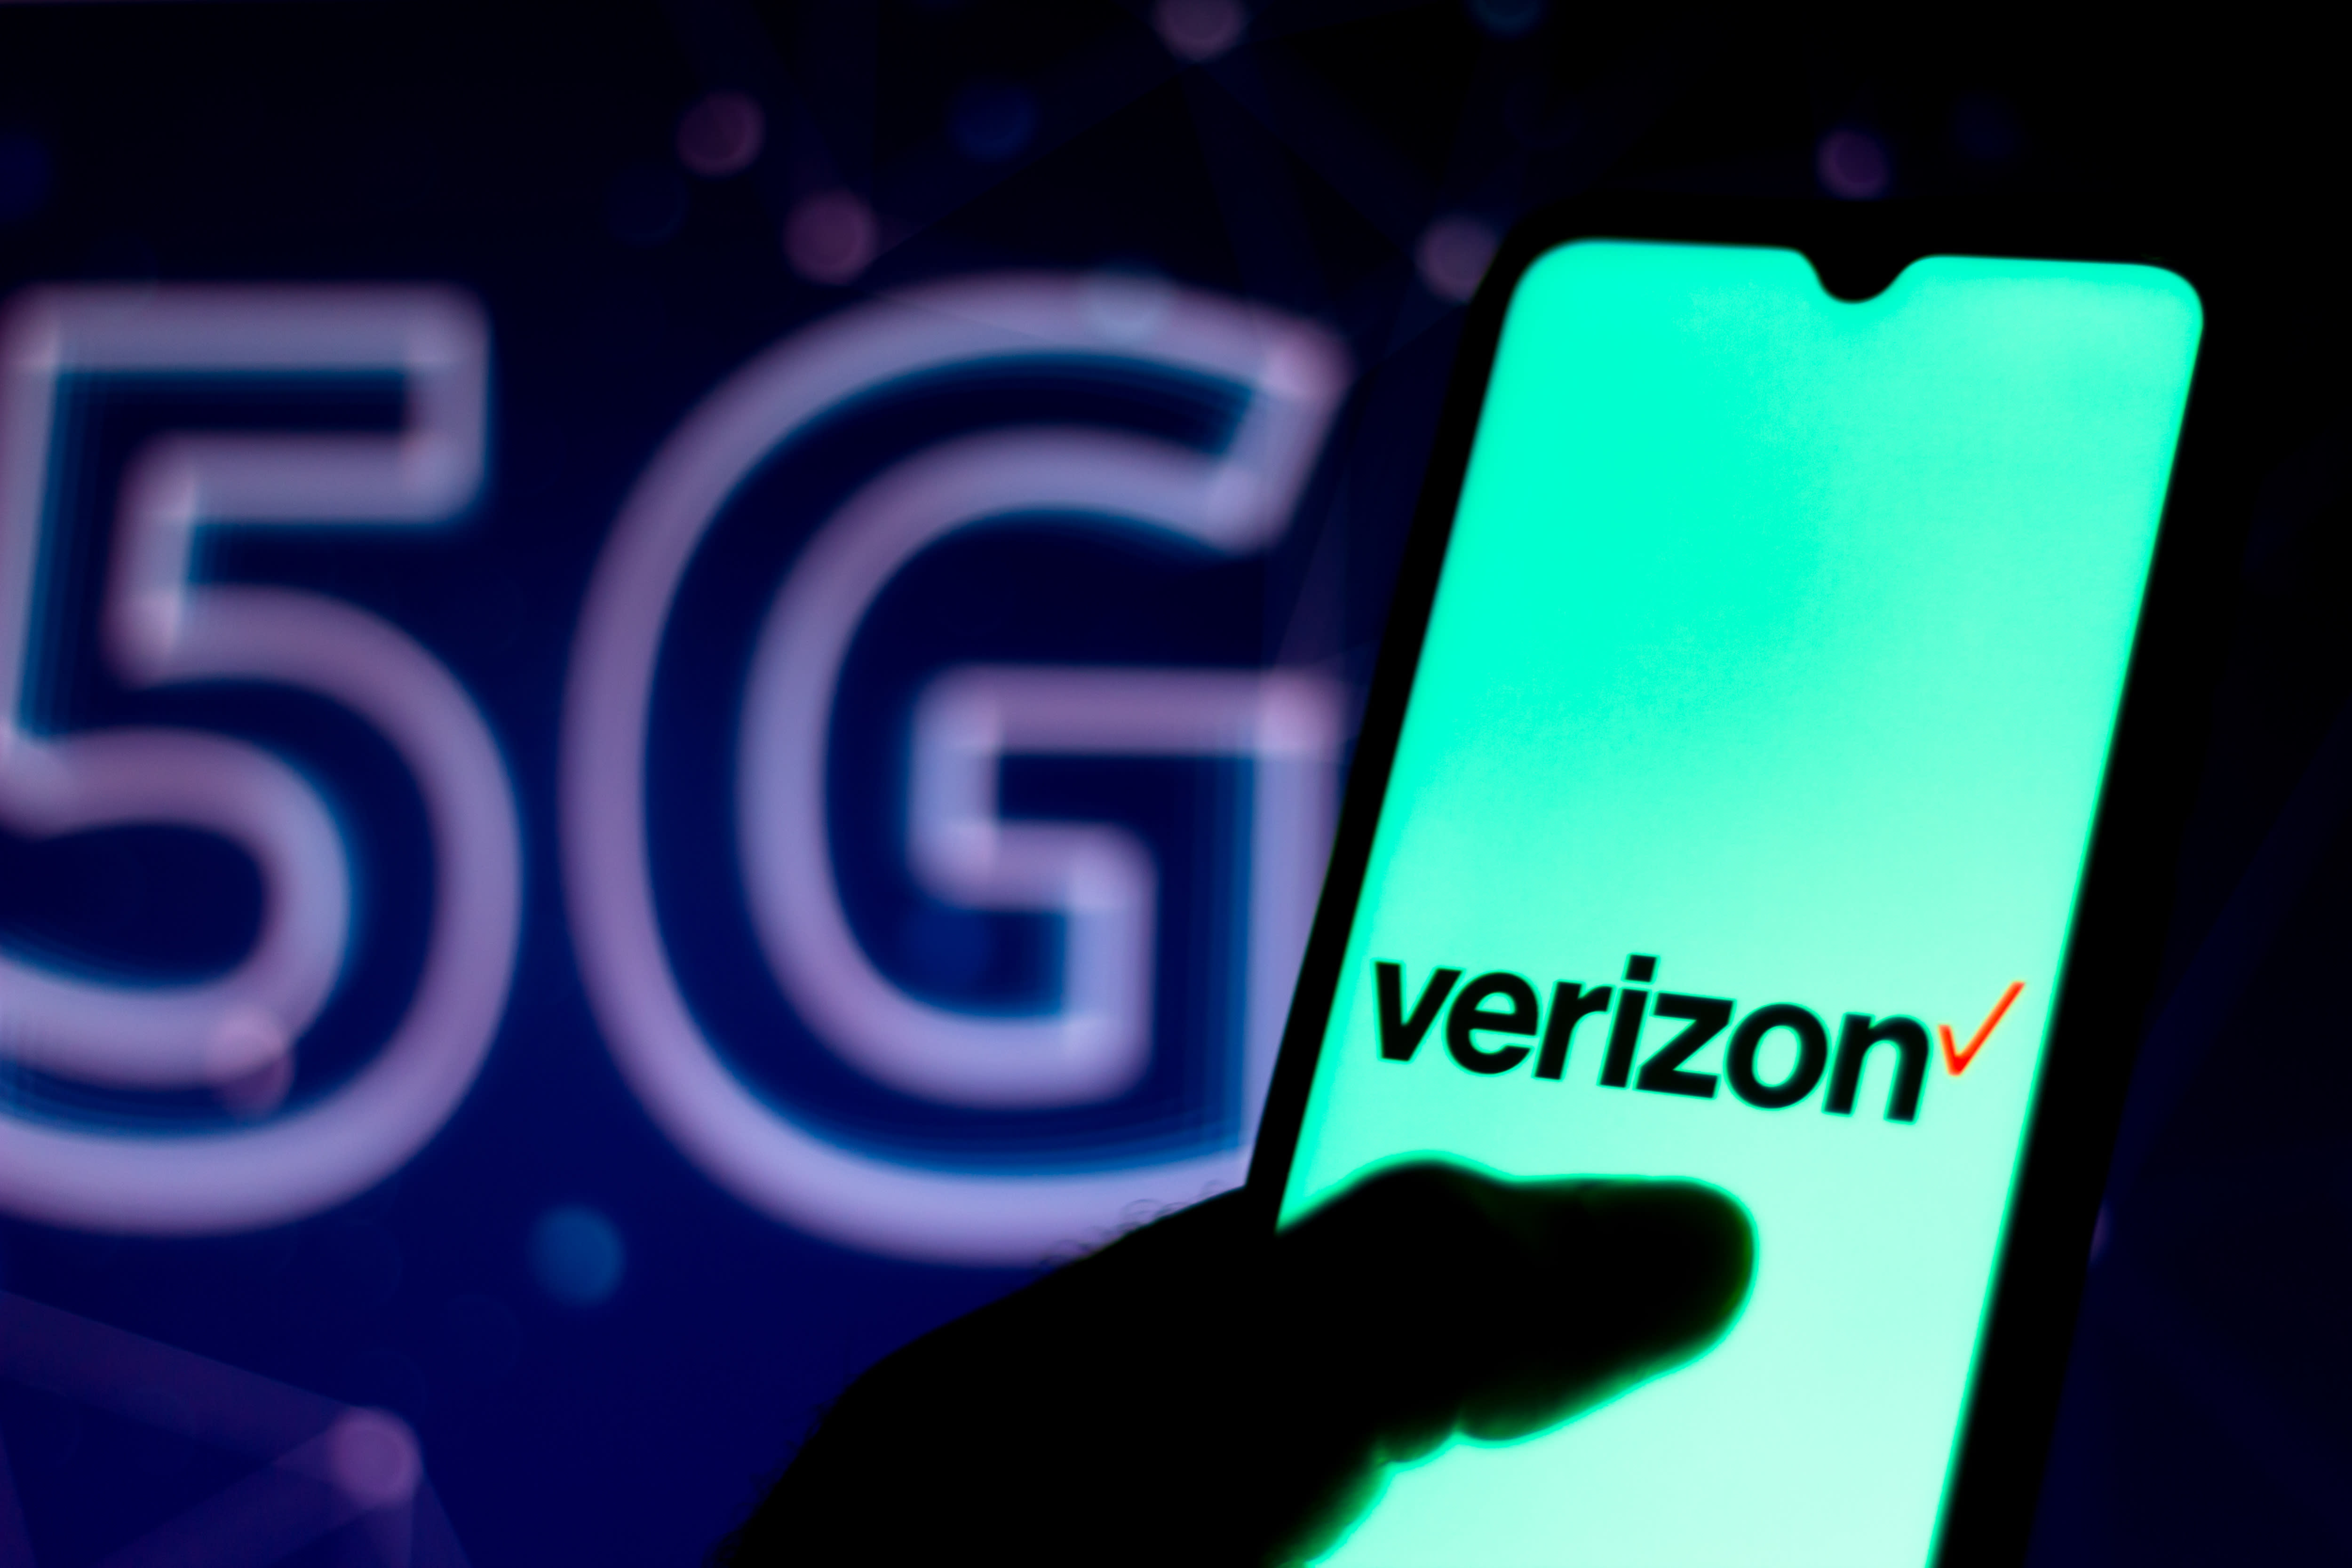 Verizon is committing more than $ 45 billion in its 5G spectrum offering